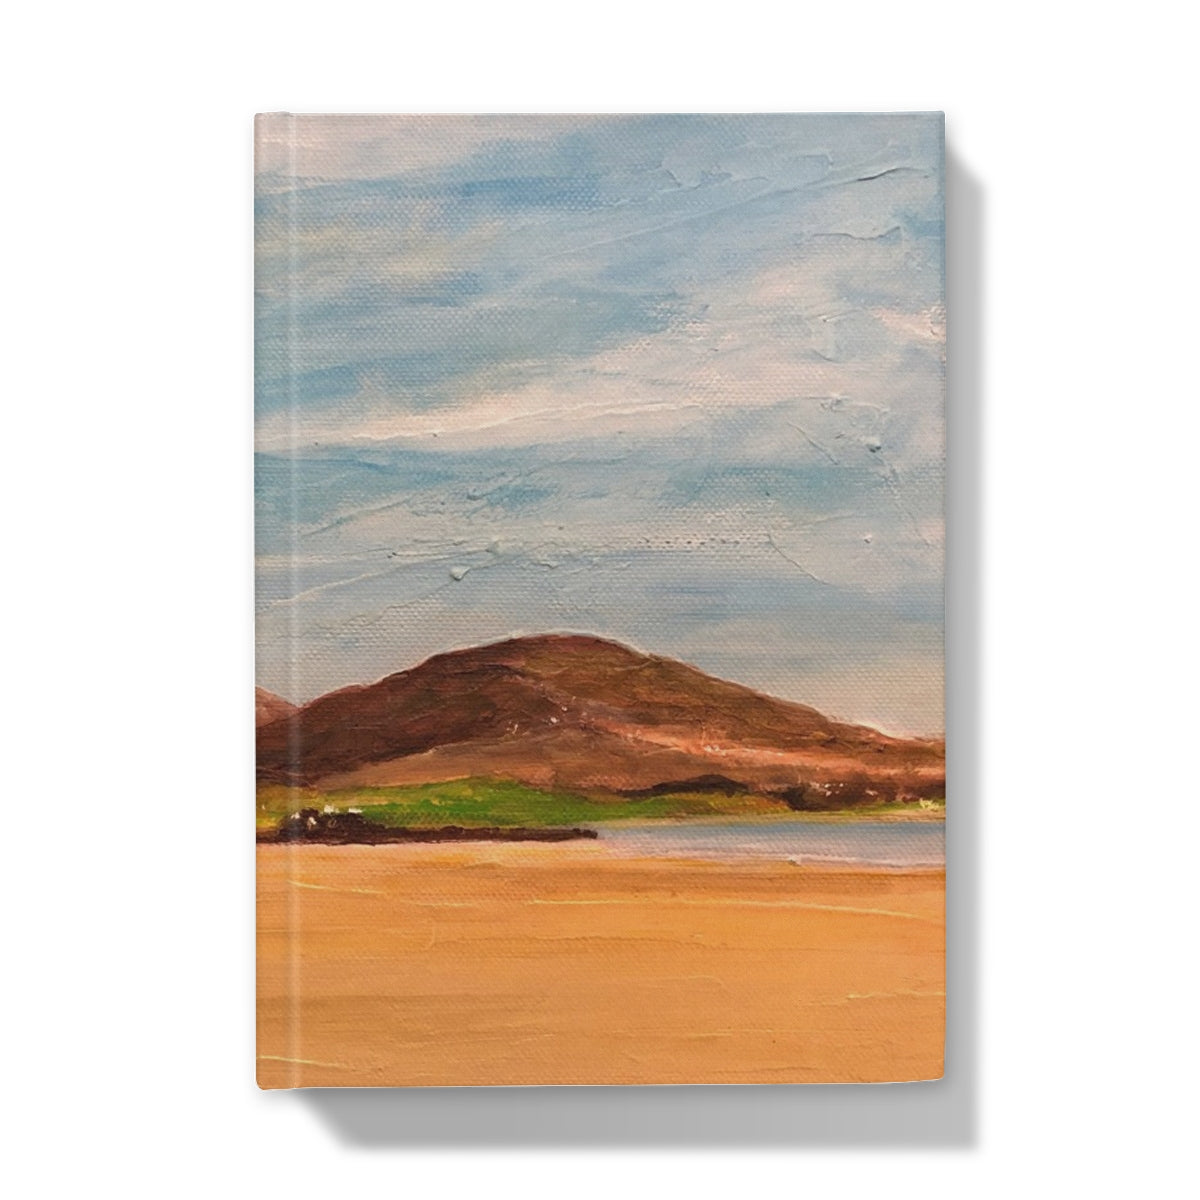 Uig Sands Lewis Art Gifts Hardback Journal-Journals & Notebooks-Hebridean Islands Art Gallery-A4-Lined-Paintings, Prints, Homeware, Art Gifts From Scotland By Scottish Artist Kevin Hunter